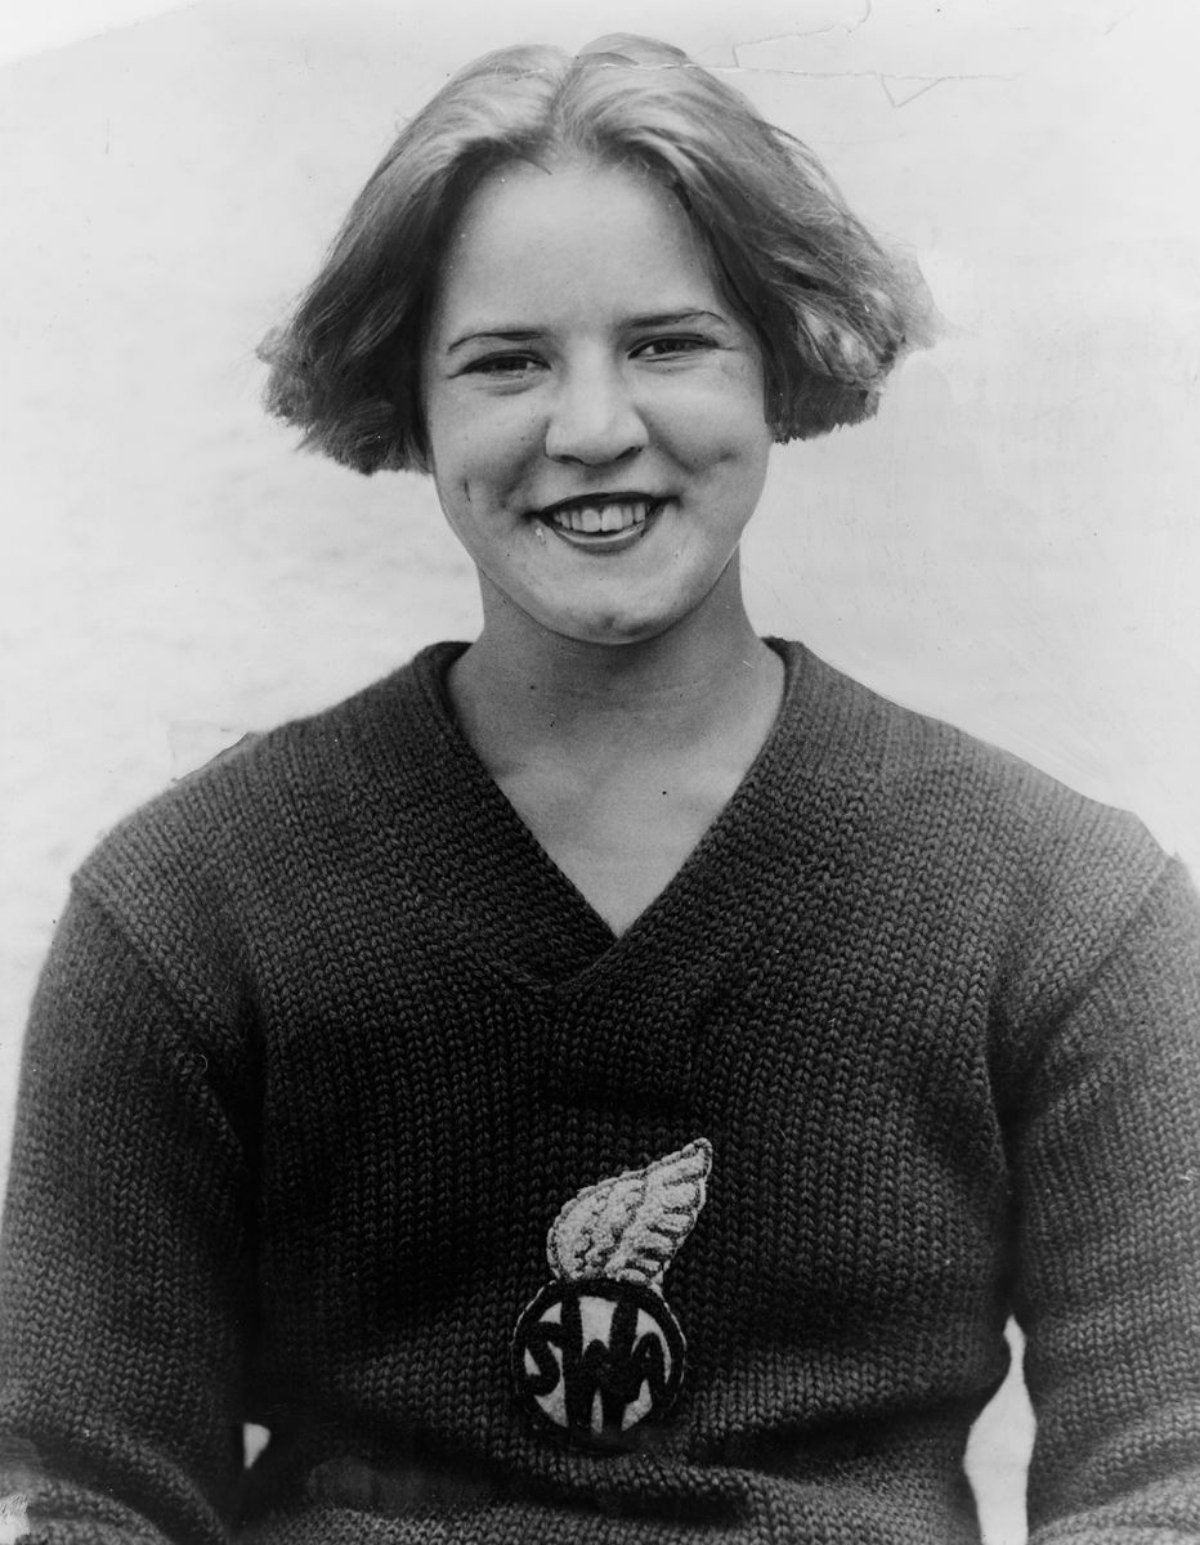 The Day Gertrude Ederle Shattered Records and Became the First Woman to Cross the Channel, 1926